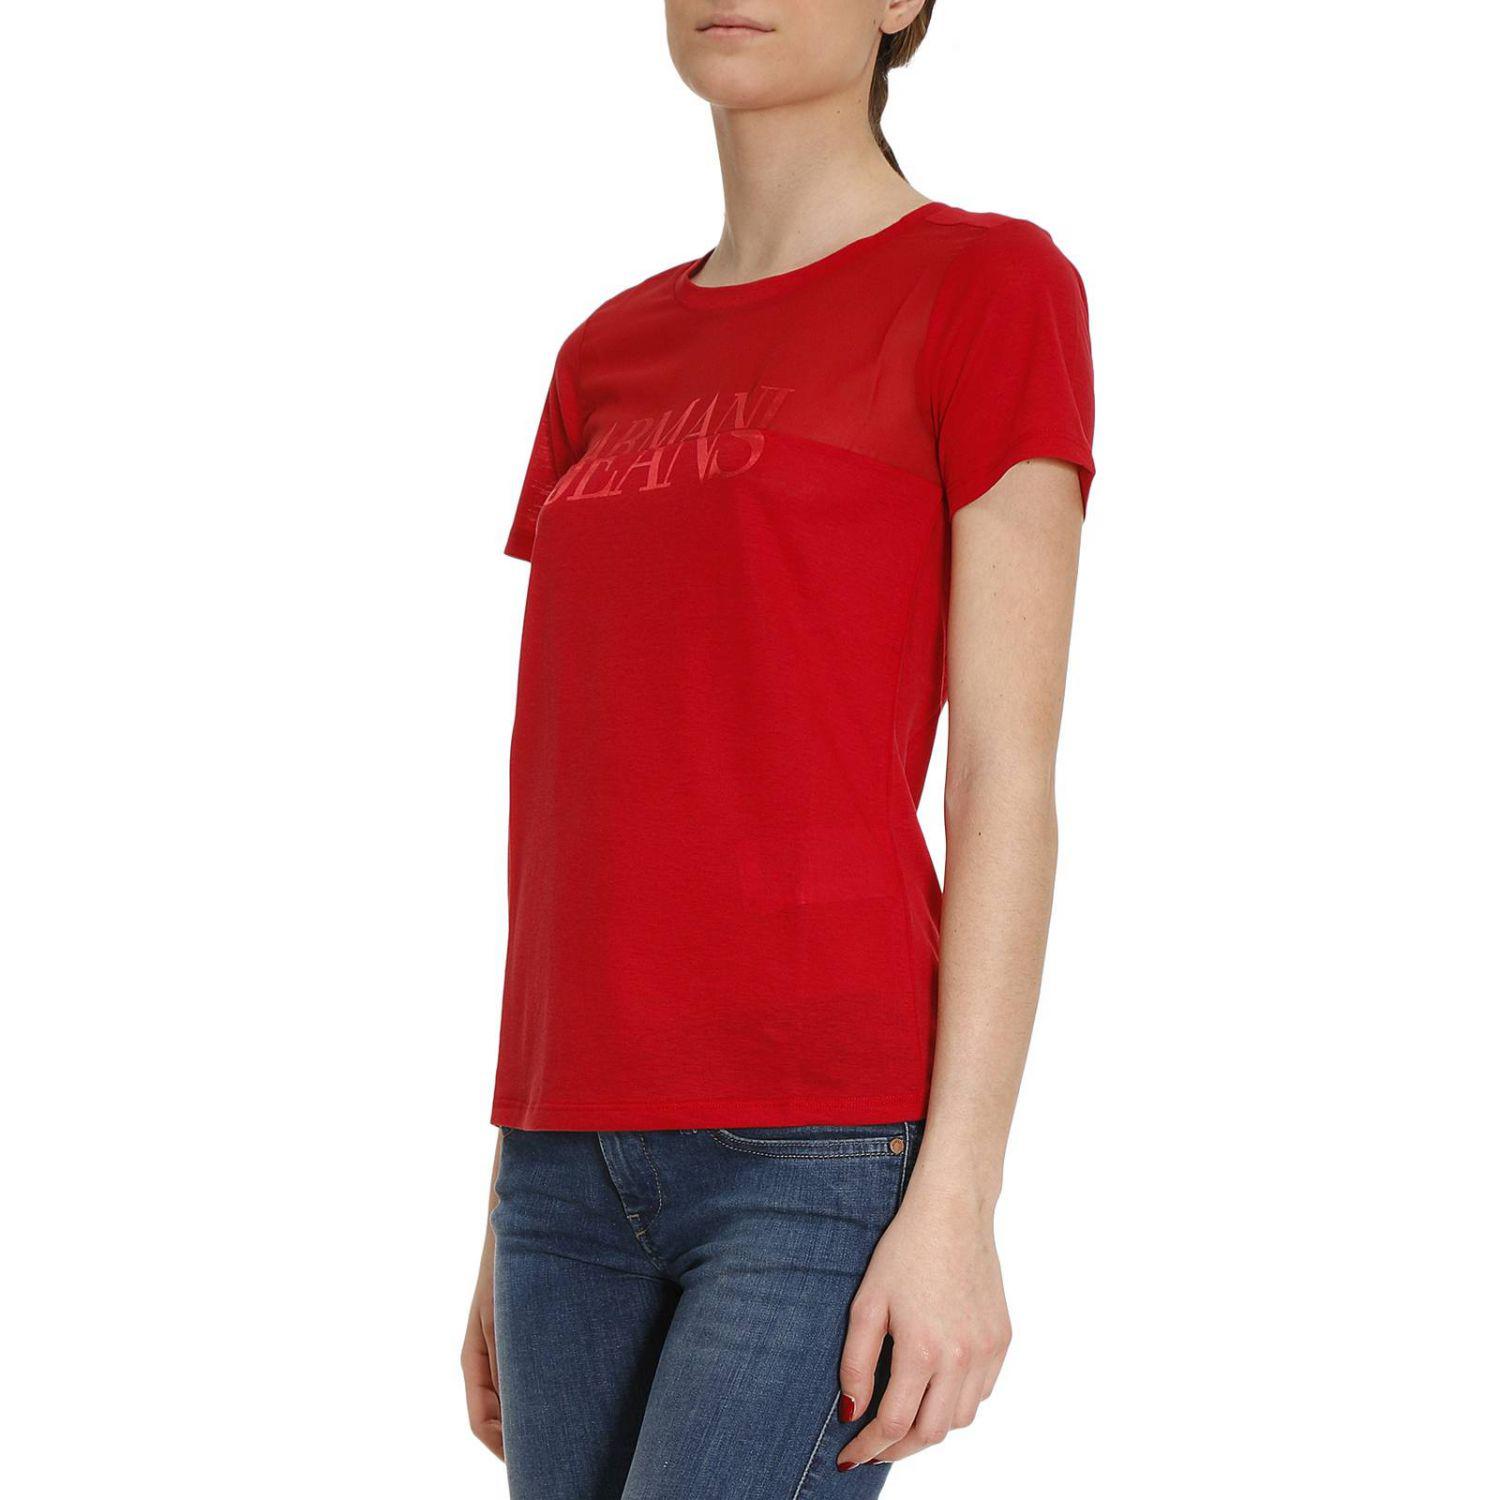 Armani Jeans Synthetic T-shirt Women in Red - Lyst